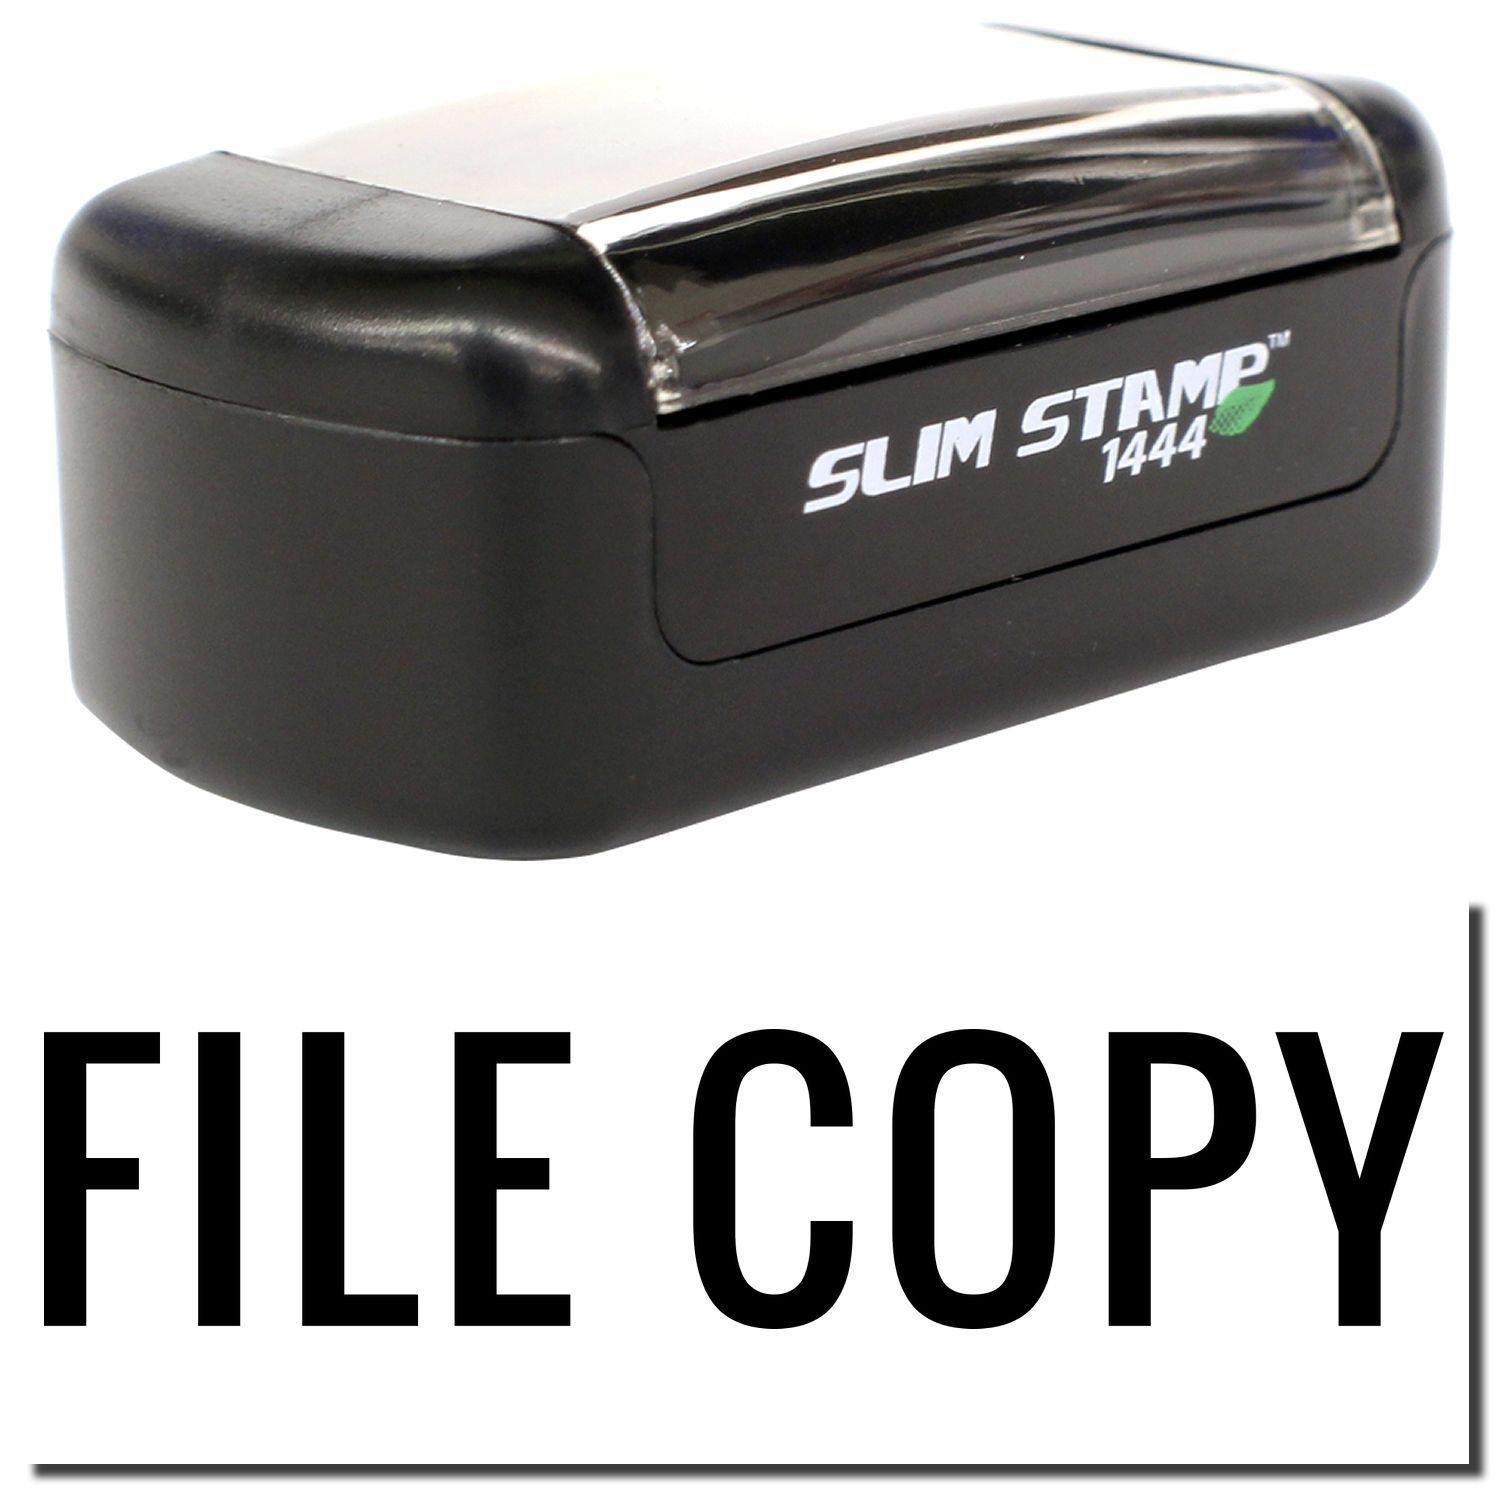 A stock office pre-inked stamp with a stamped image showing how the text "FILE COPY" in a narrow font is displayed after stamping.